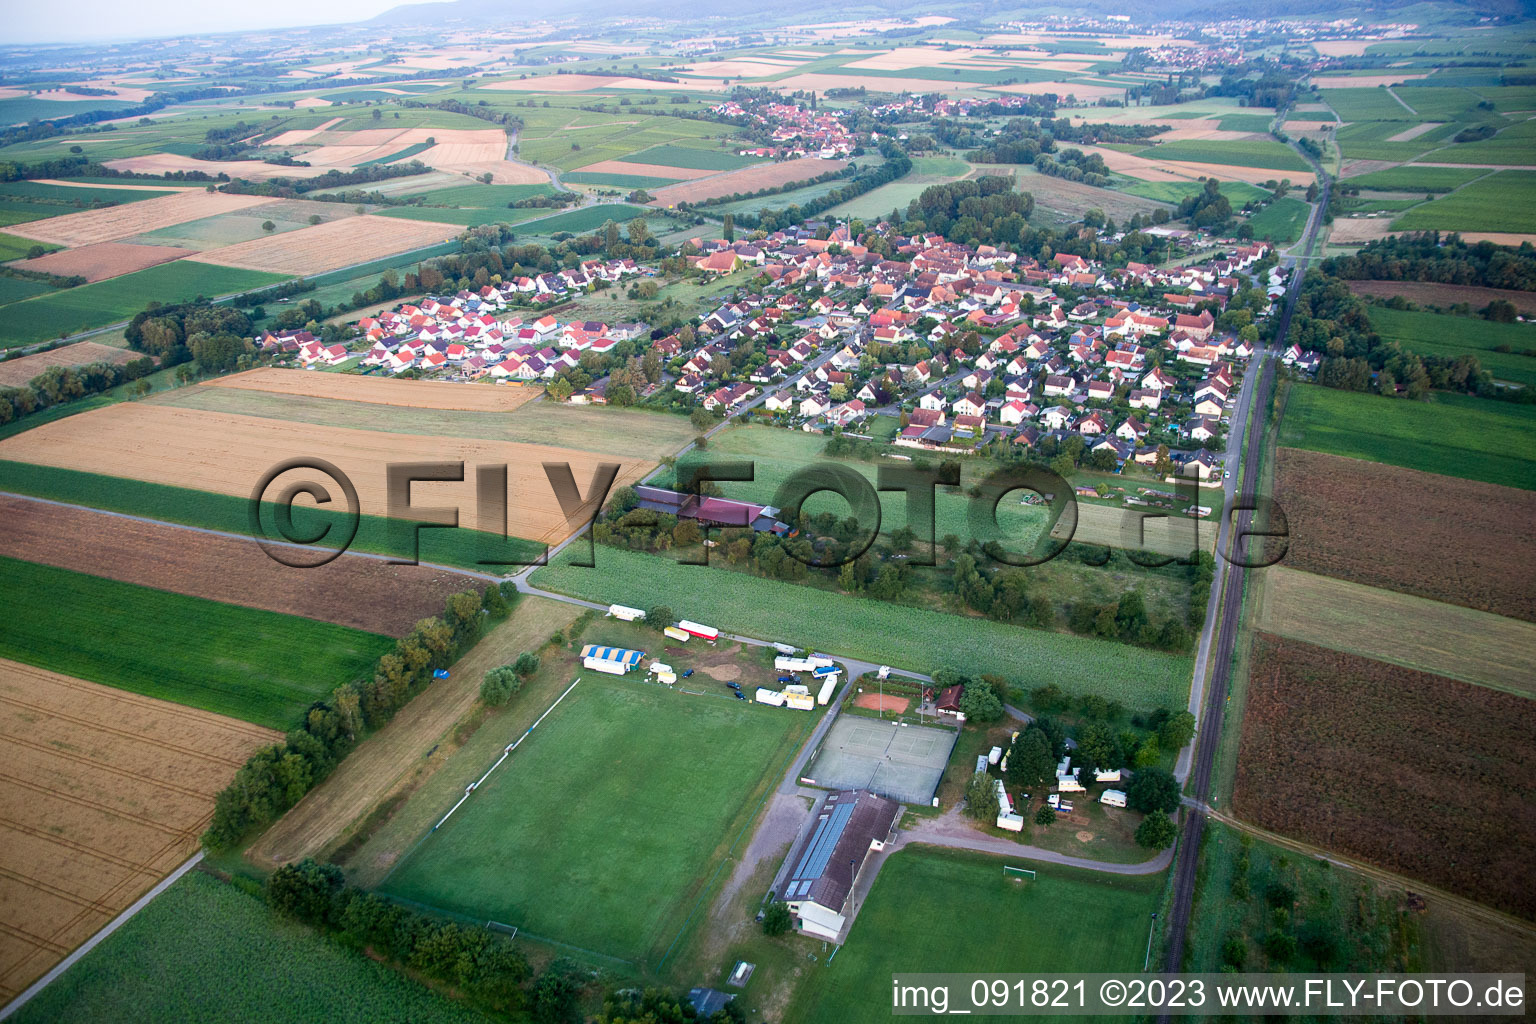 Barbelroth in the state Rhineland-Palatinate, Germany from above